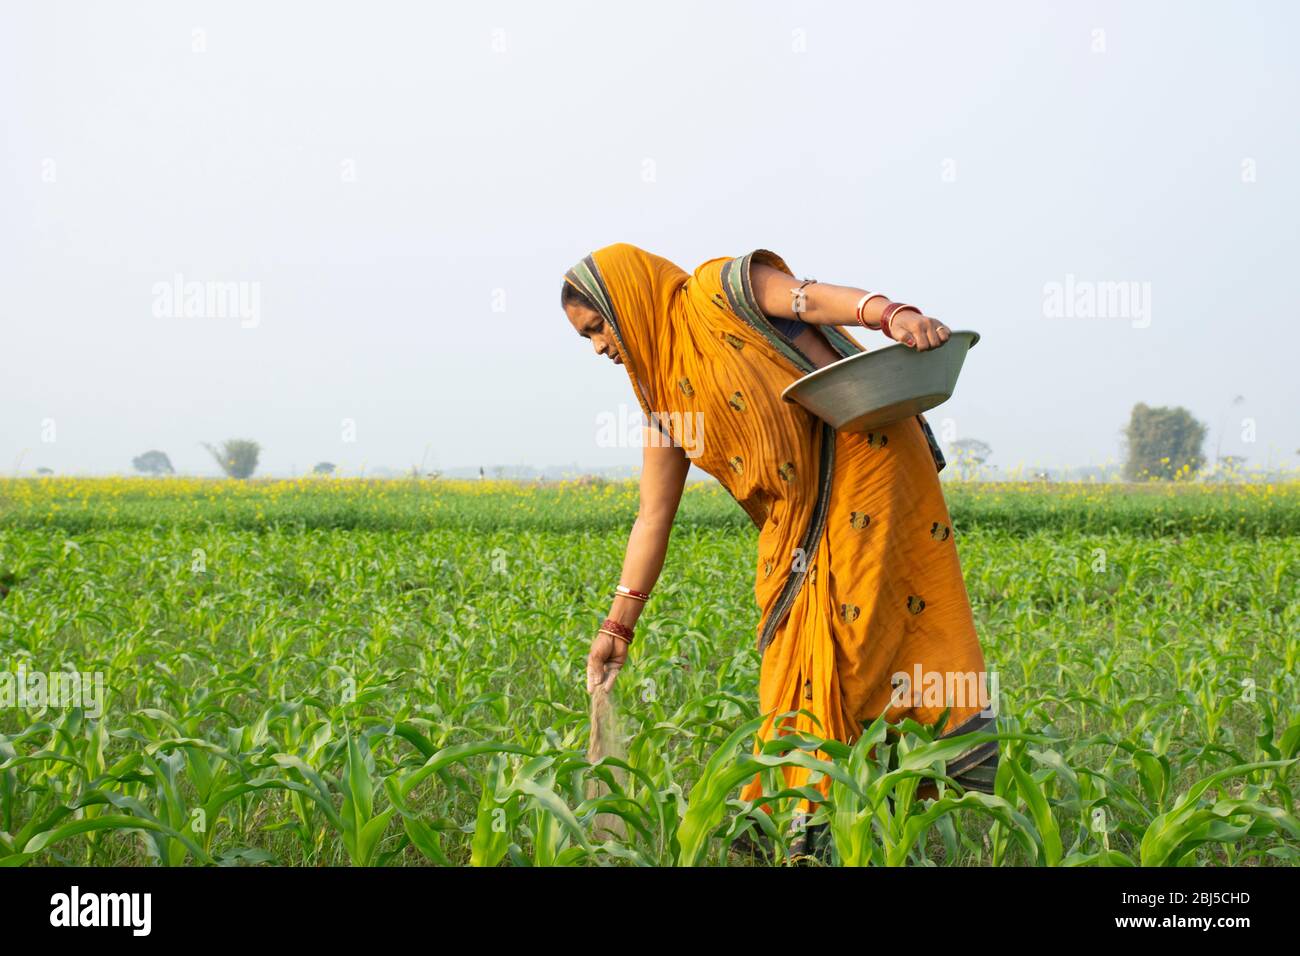 indian woman farmer working in agricultural field Stock Photo